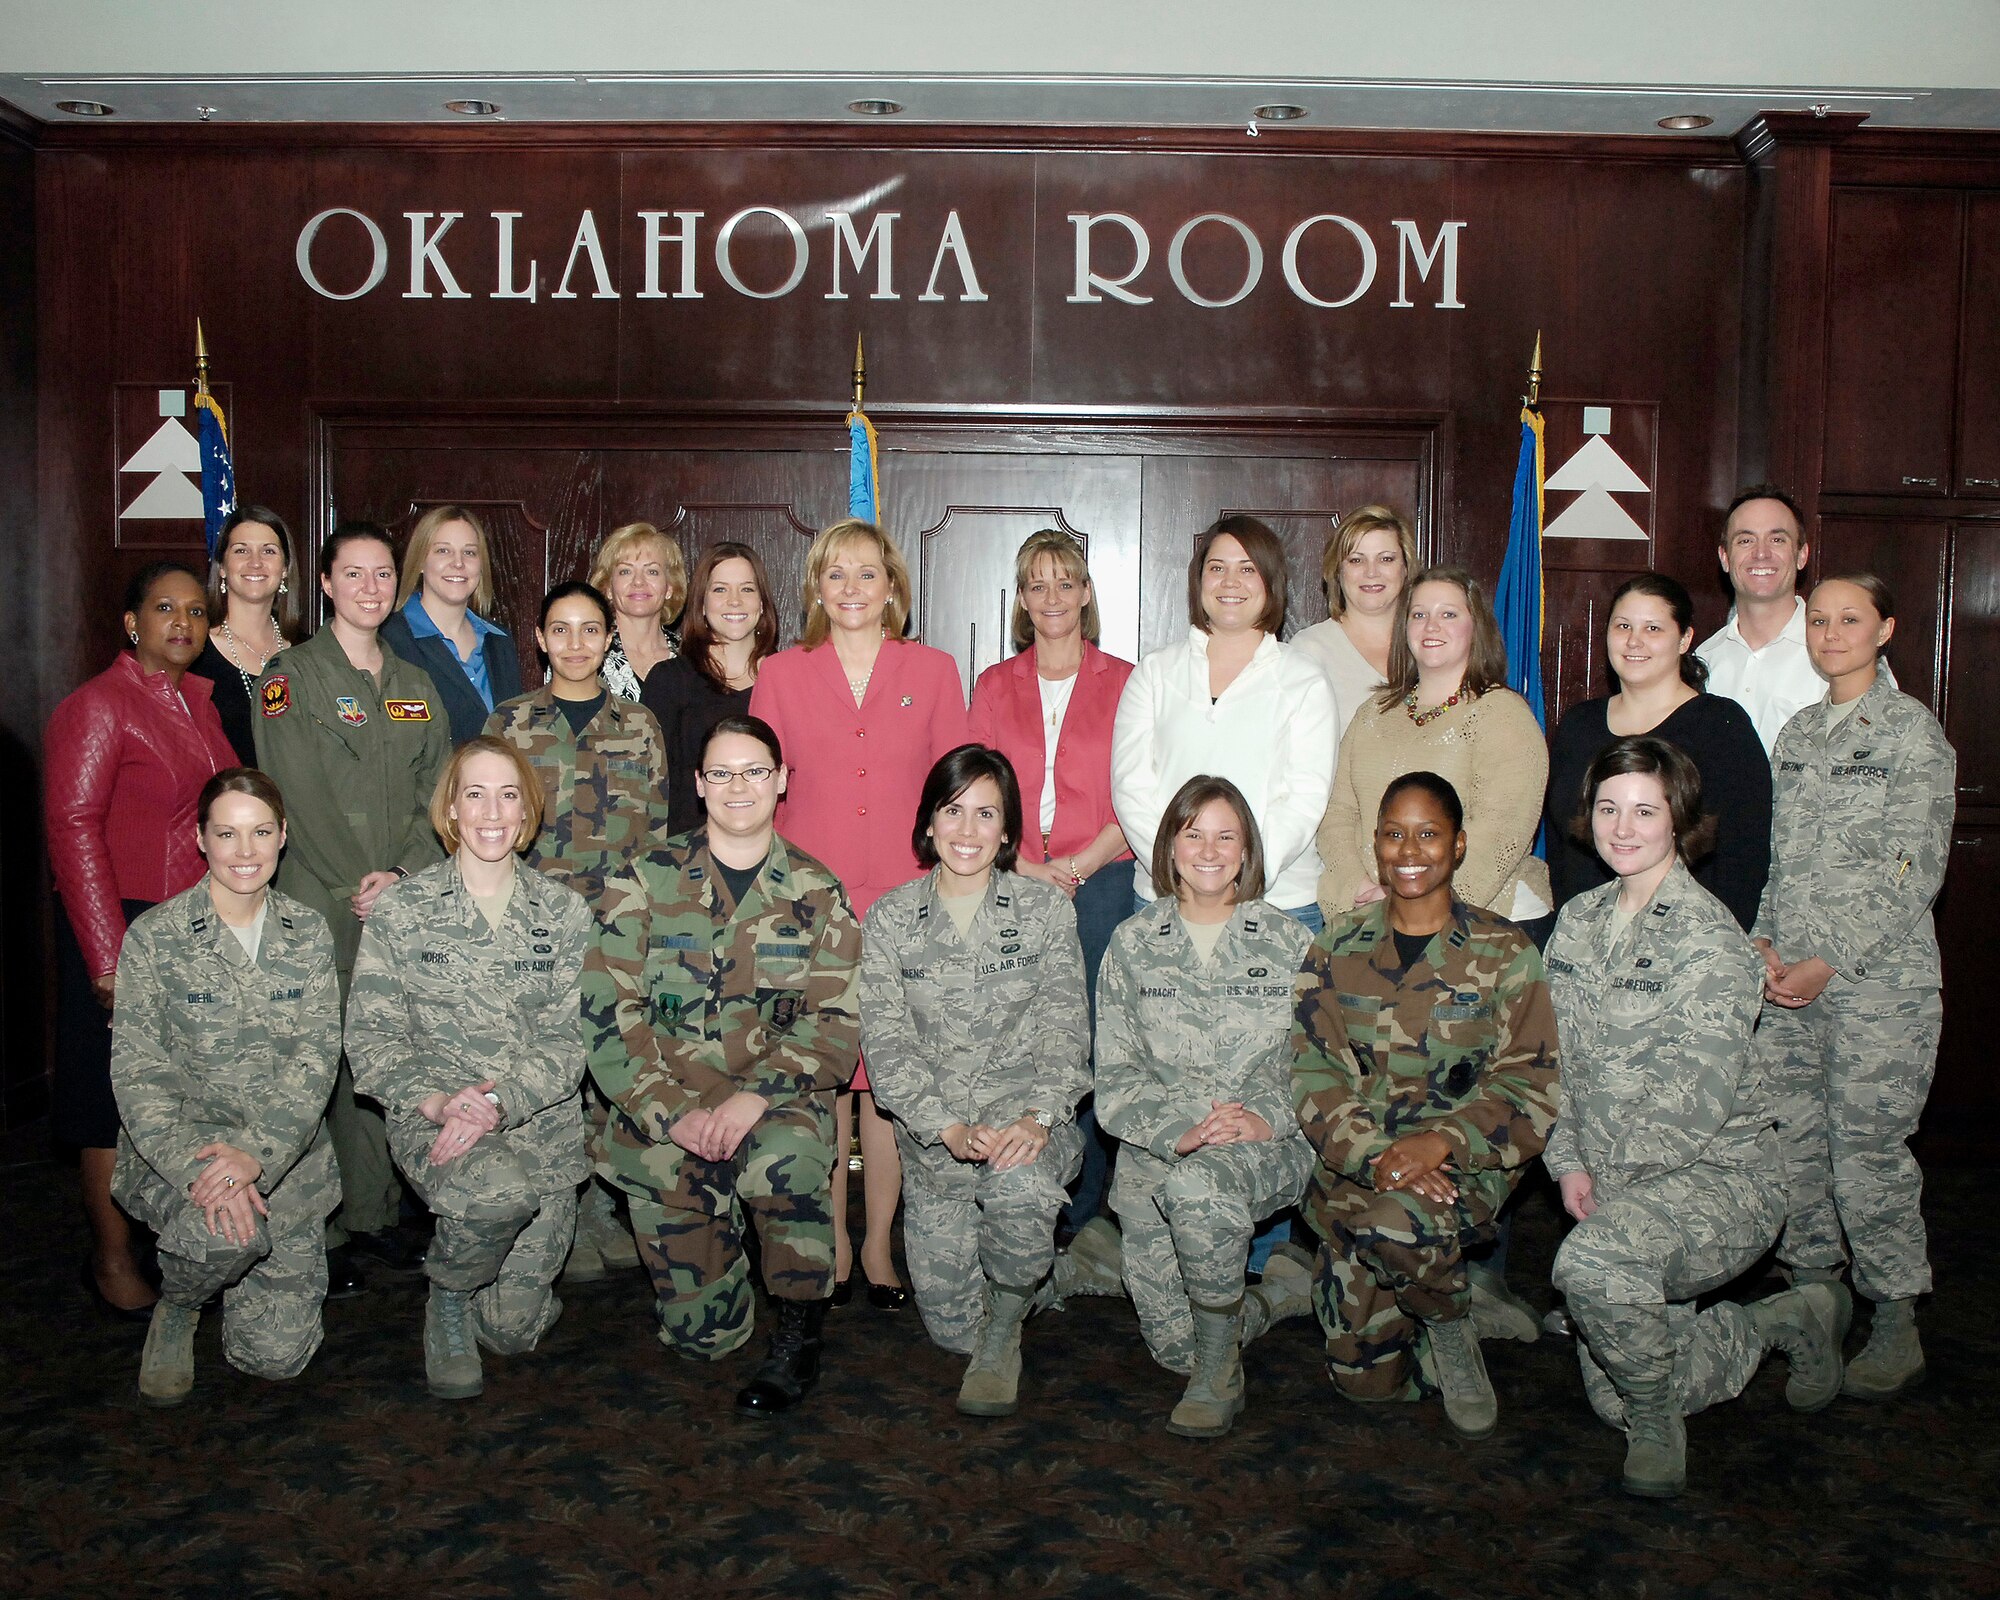 Congresswoman Mary Fallin visited with members of the Women’s Officers’ Mentoring Network recently. The network is made up primarily of female company grade officers that mentor and learn from senior leaders’ experiences.